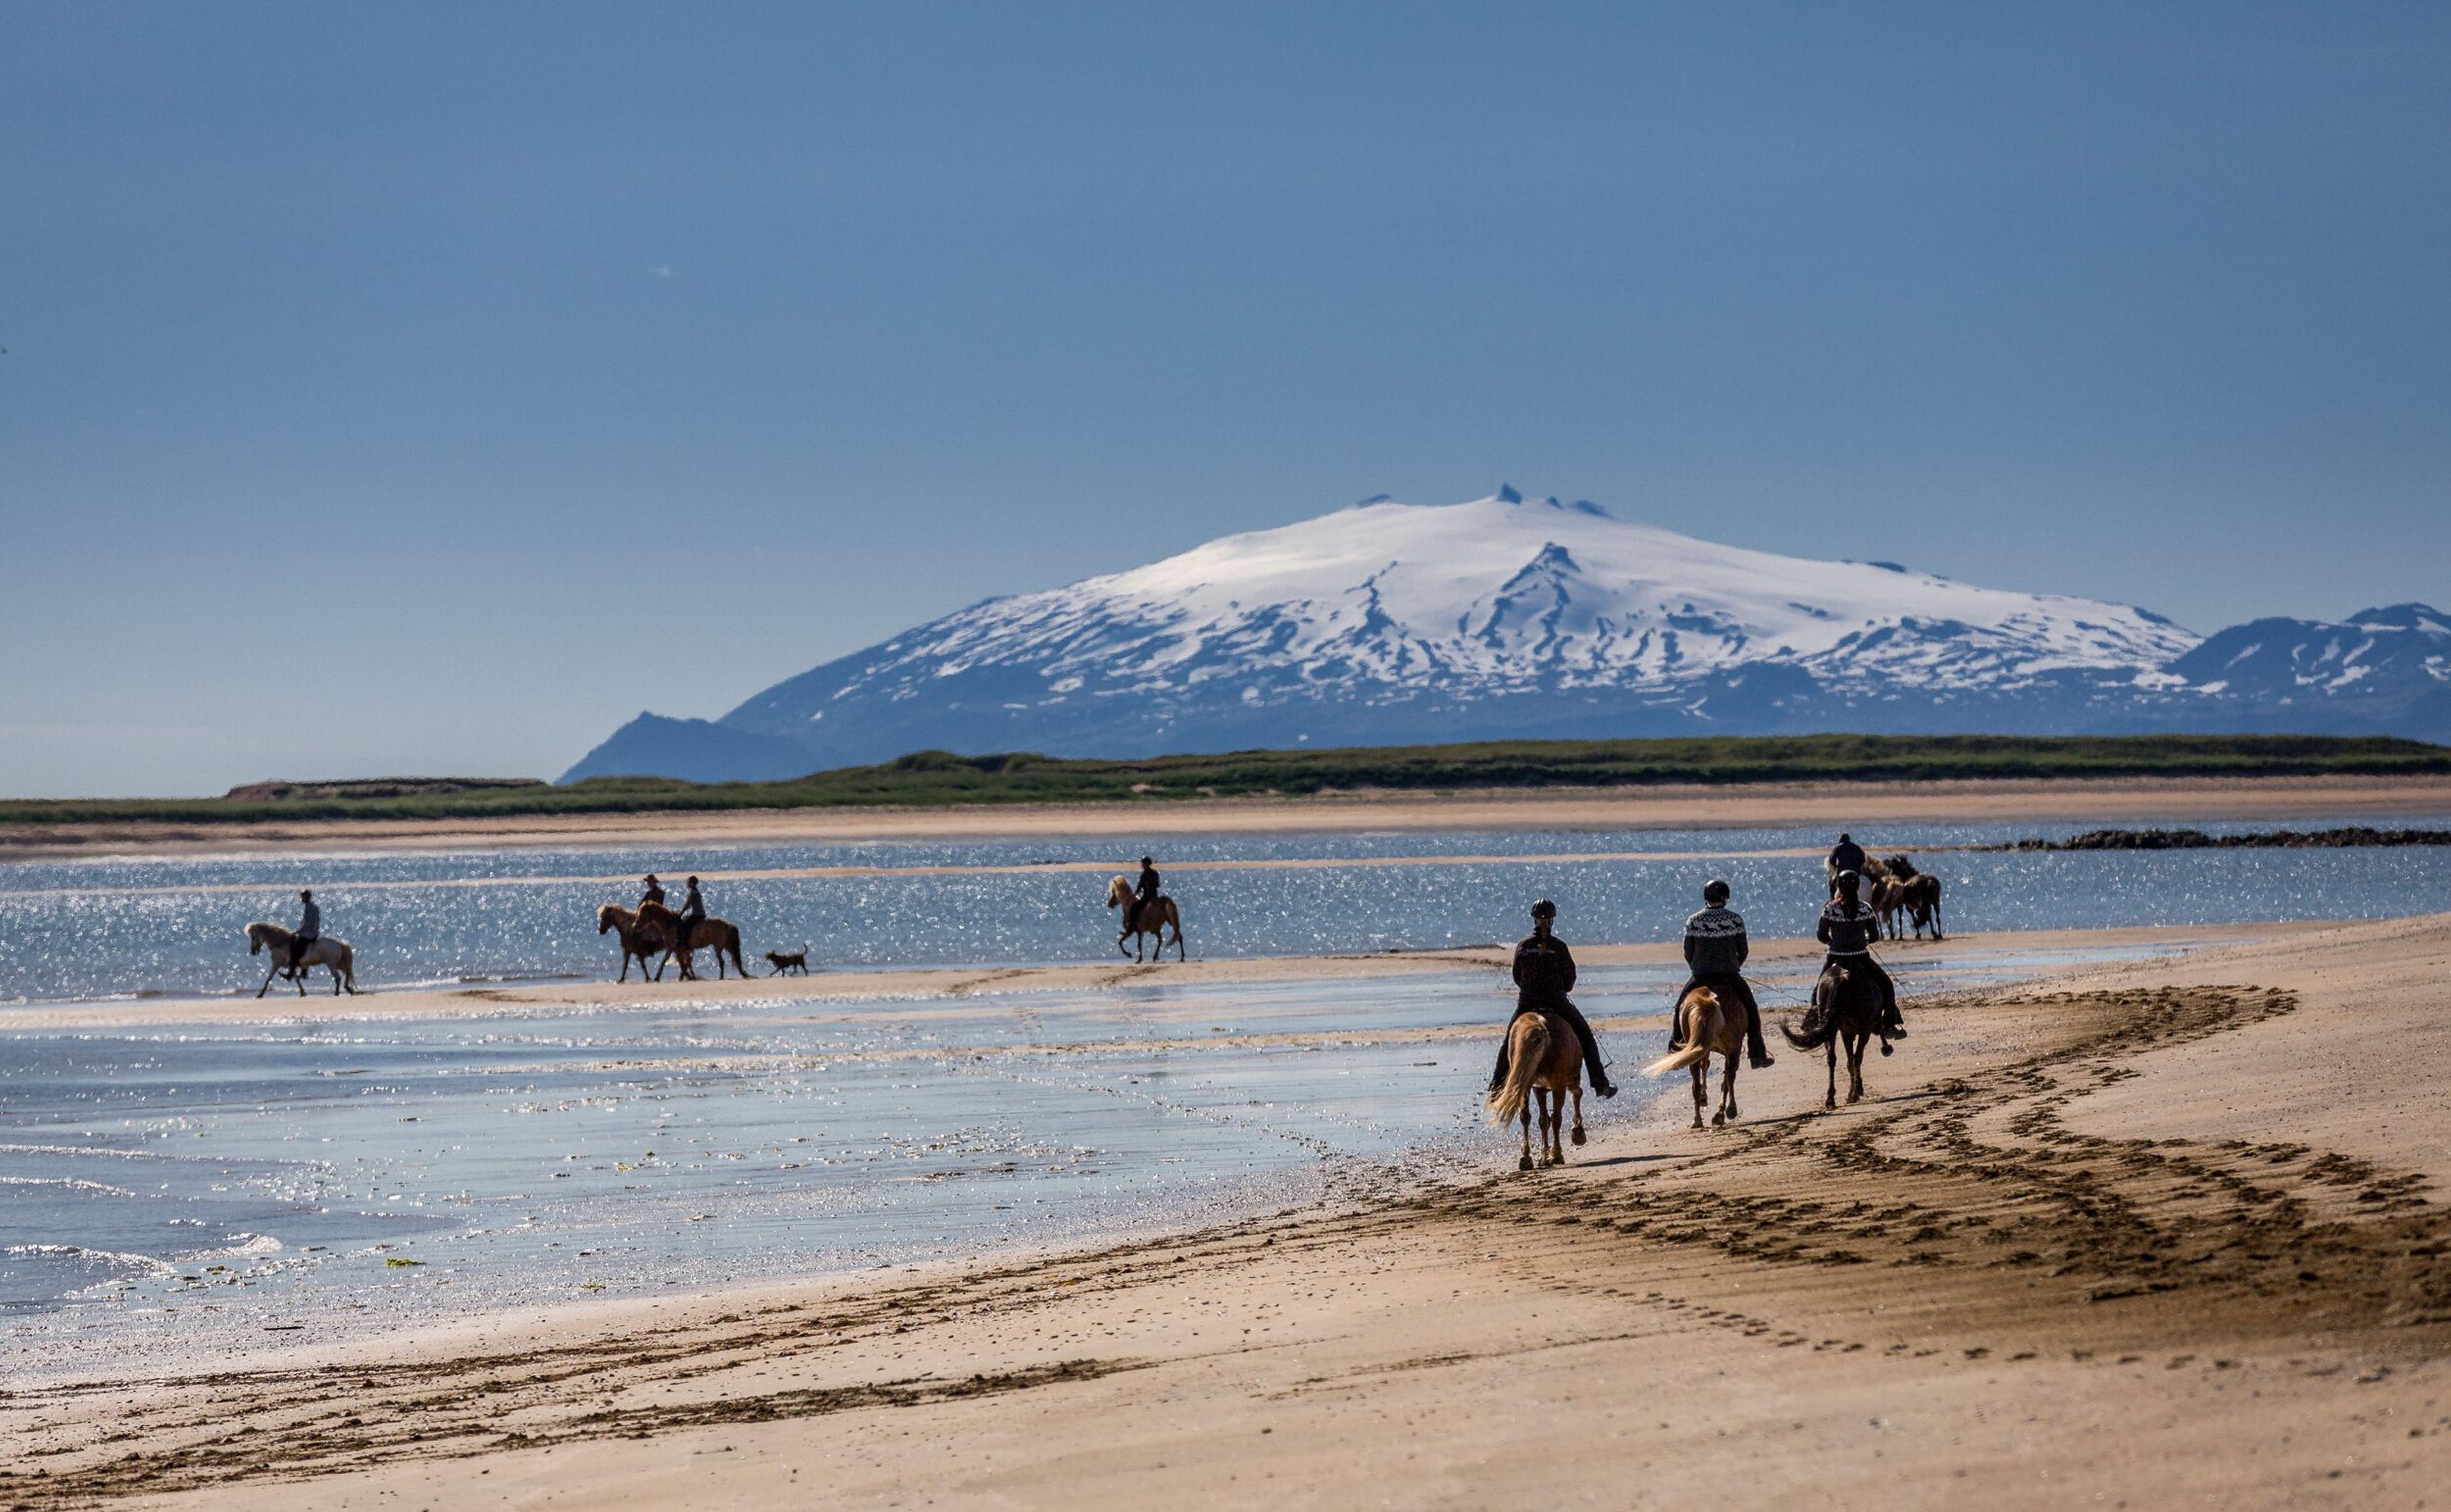  Riders on horseback traverse a sandy beach with shallow waters, with a snow-capped mountain visible in the distance under a clear blue sky.